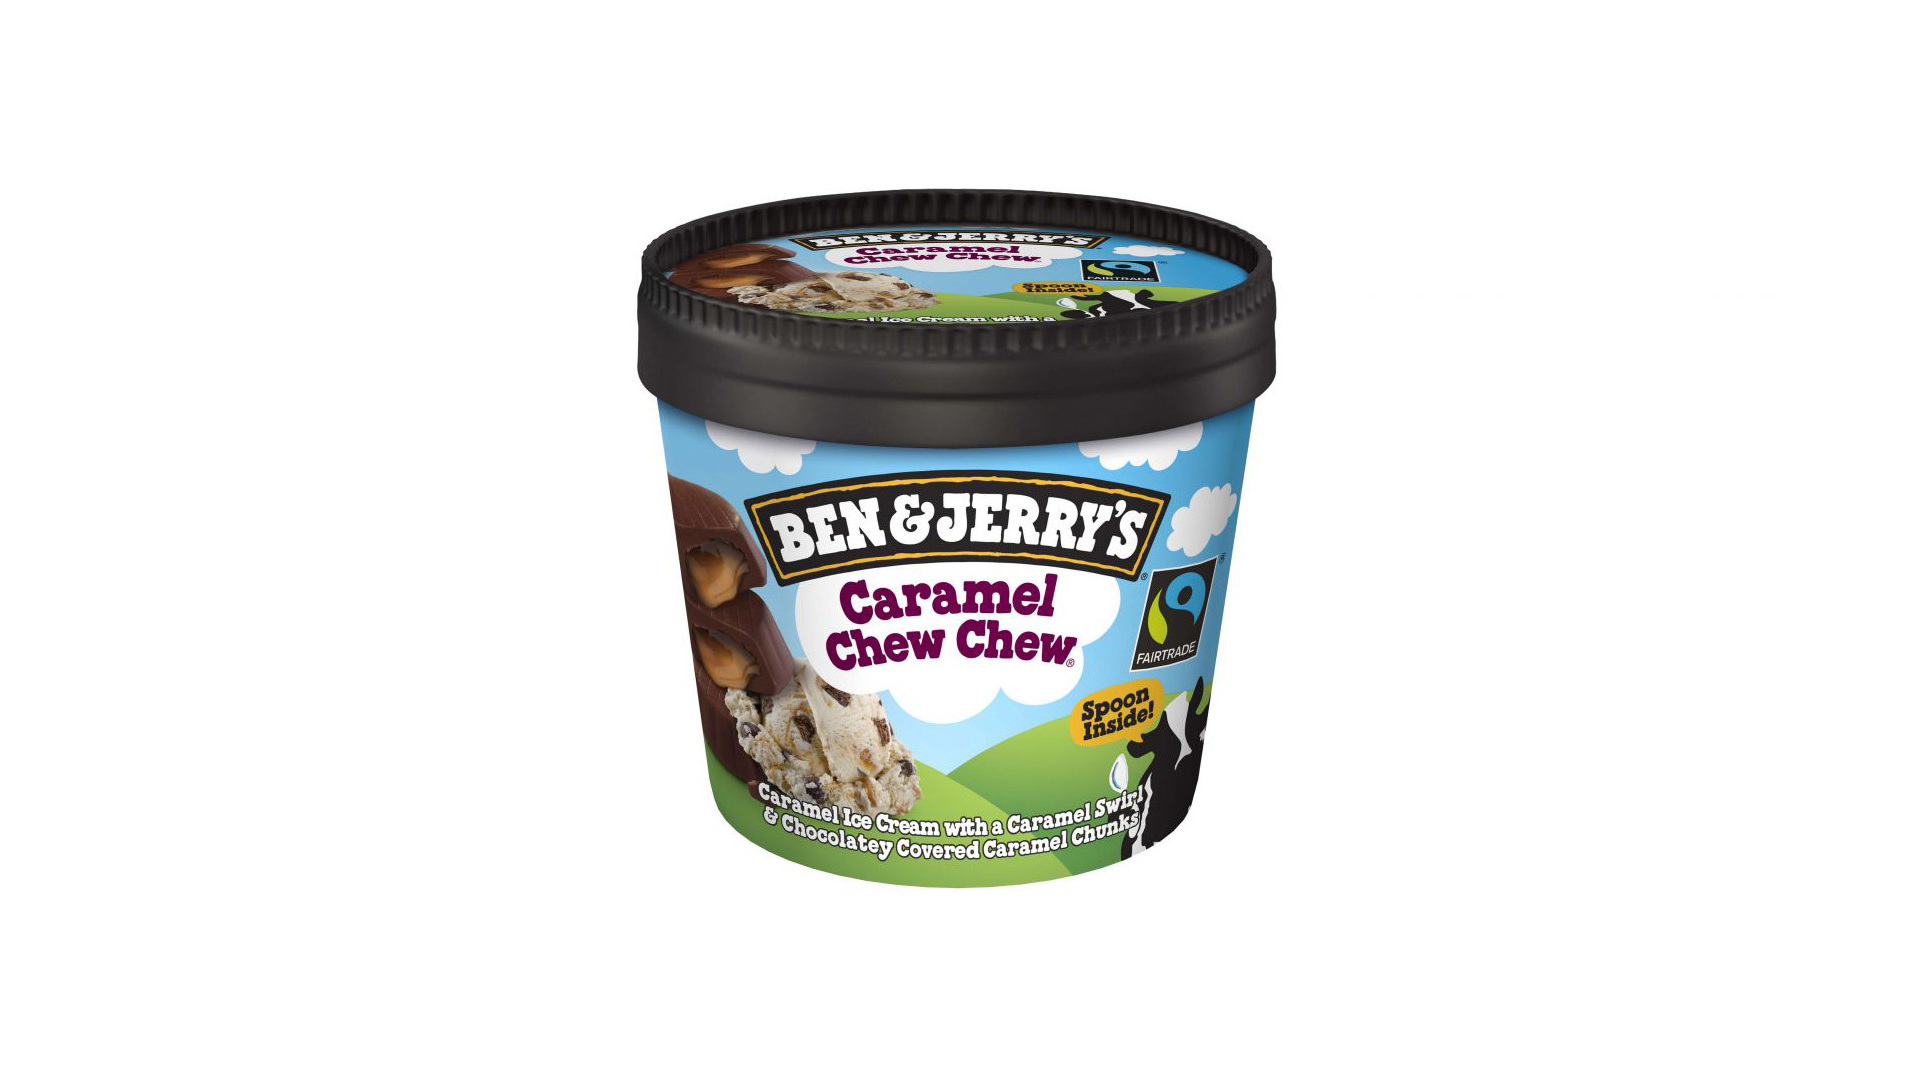 Ben & Jerry's Caramel Chew Chew 100ml - Pizza Delivery in Hale End IG8